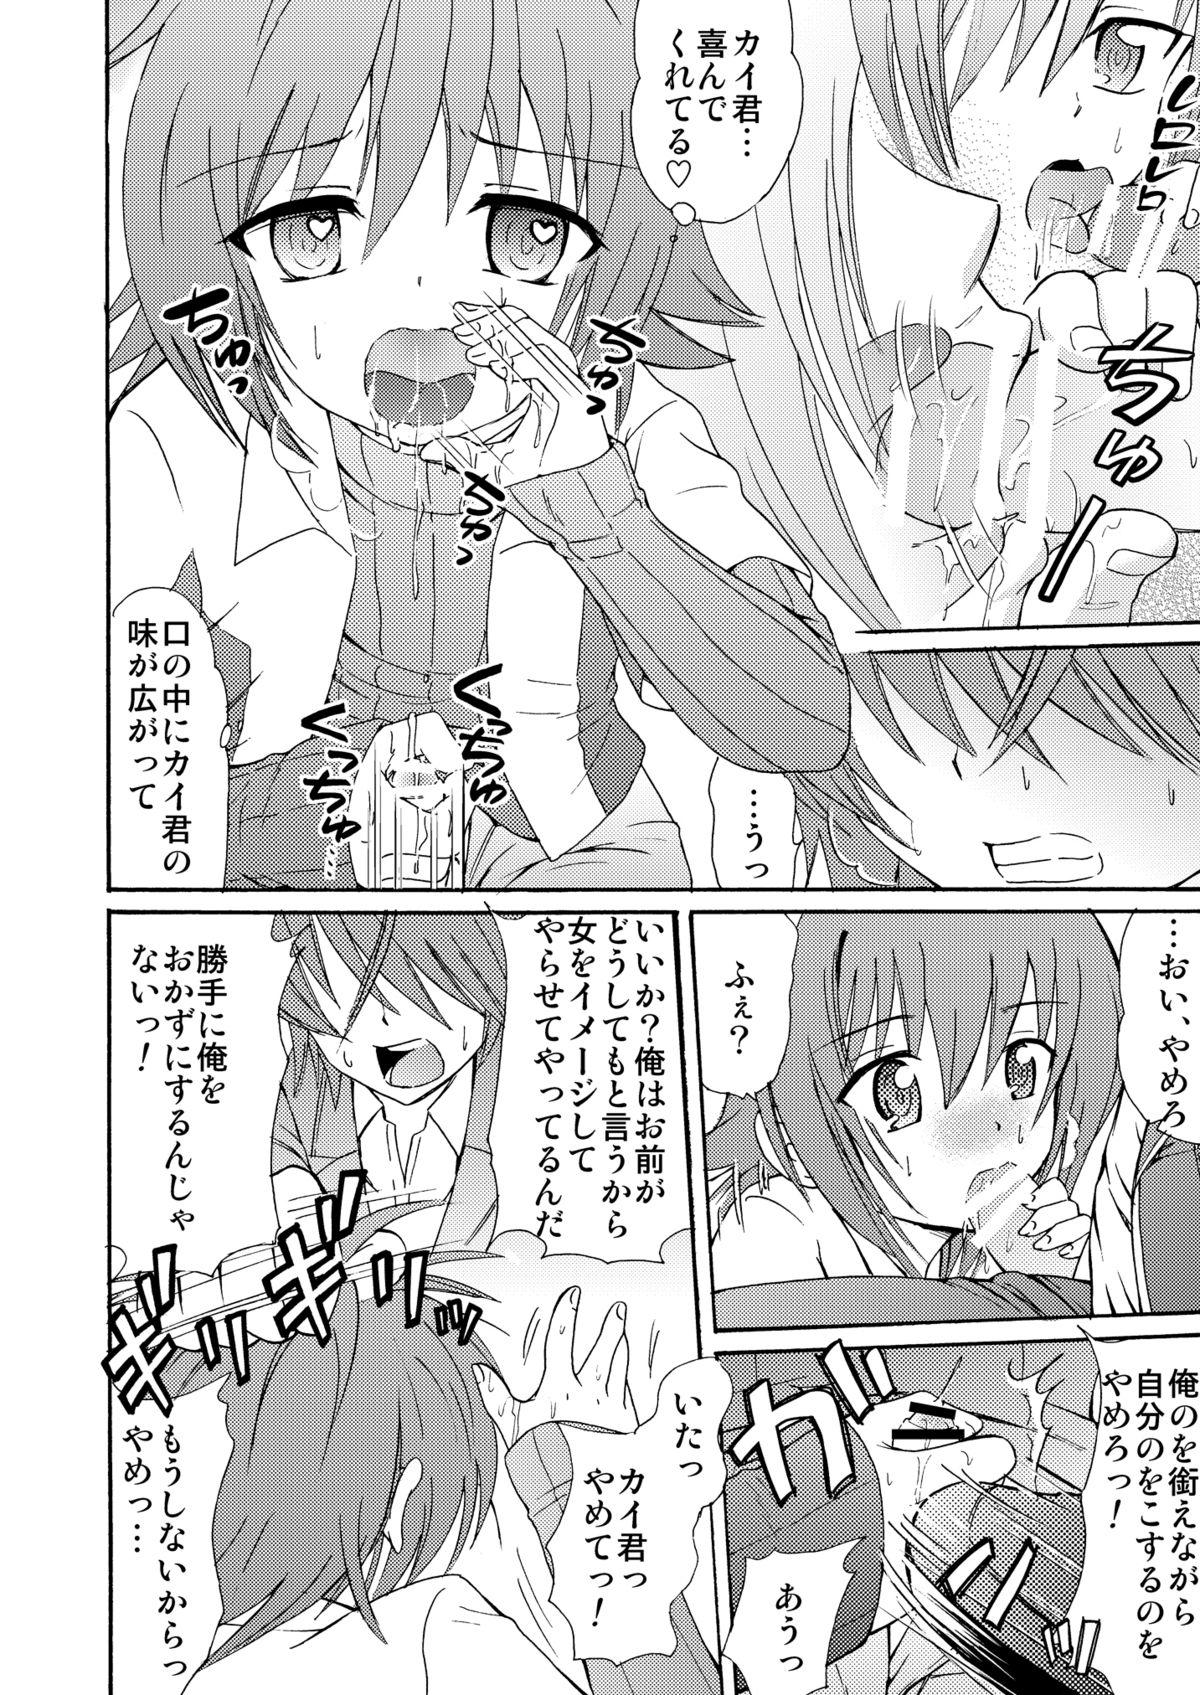 Officesex Koi no Uta - Cardfight vanguard Natural Boobs - Page 4